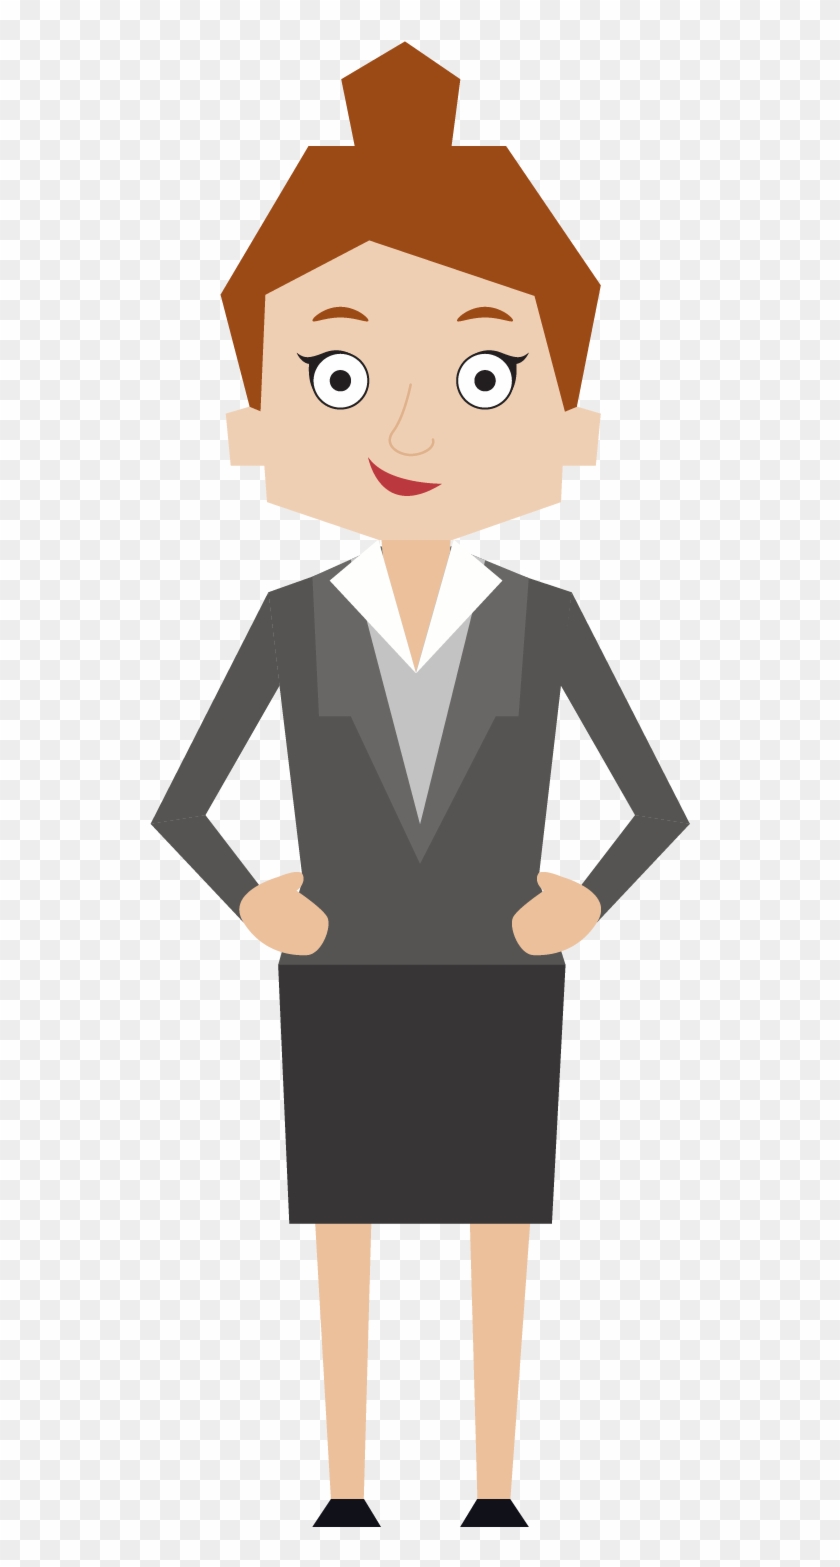 #character #design #illustration #lady #woman #officer - Officer Cartoon #653648